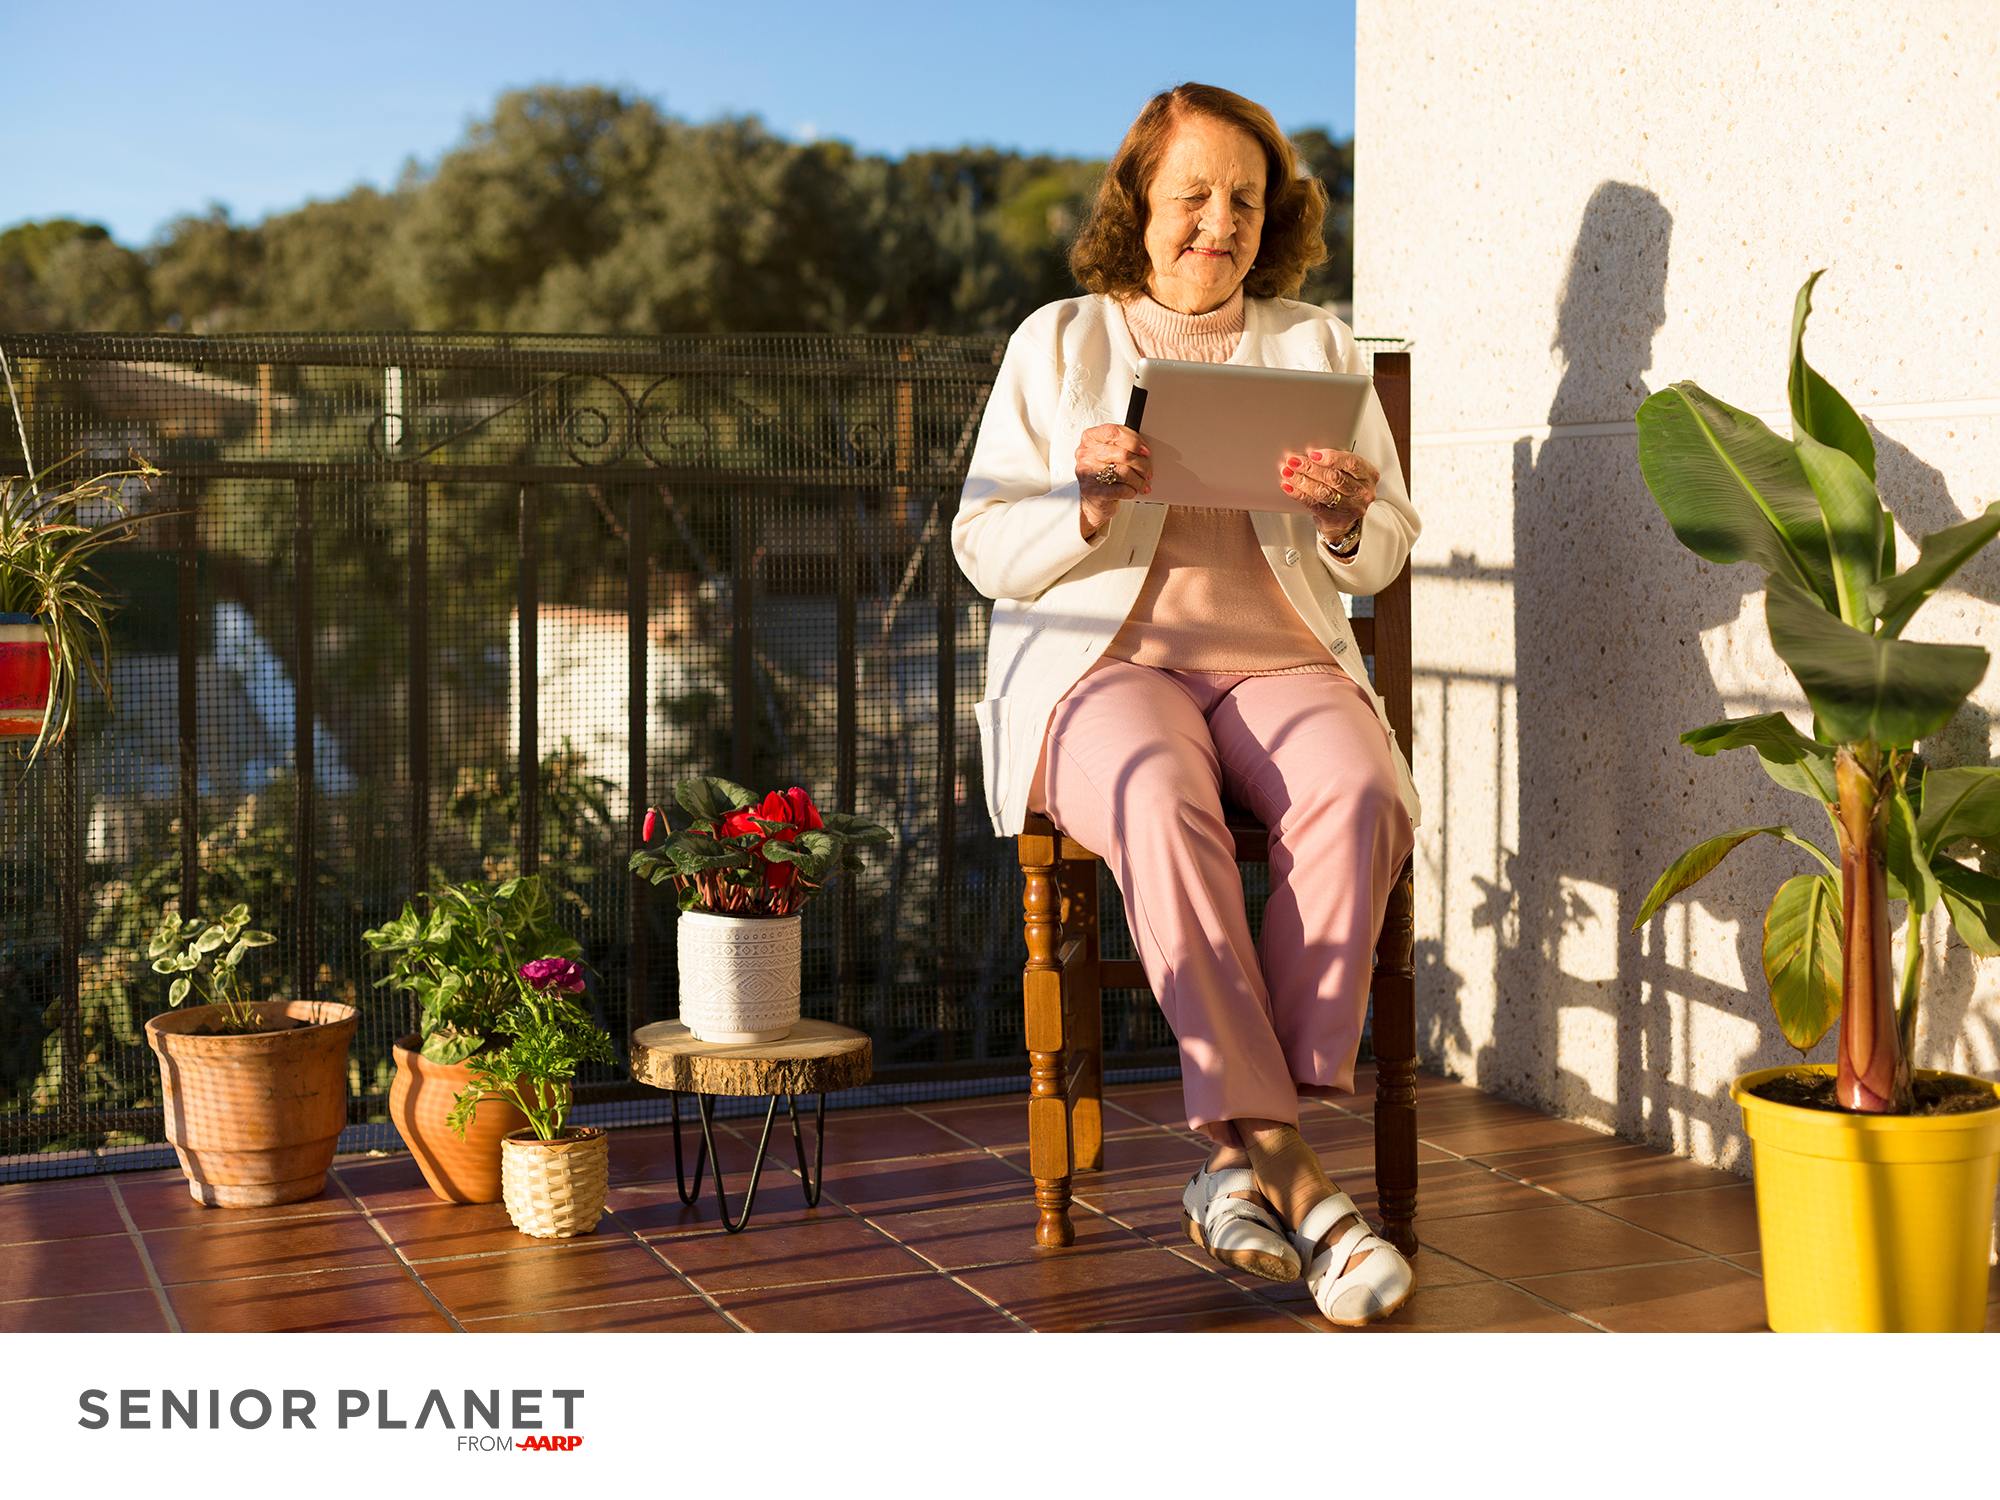 a smiling woman sitting in a chair on a balcony, holding a tablet computer and looking at it while smiling